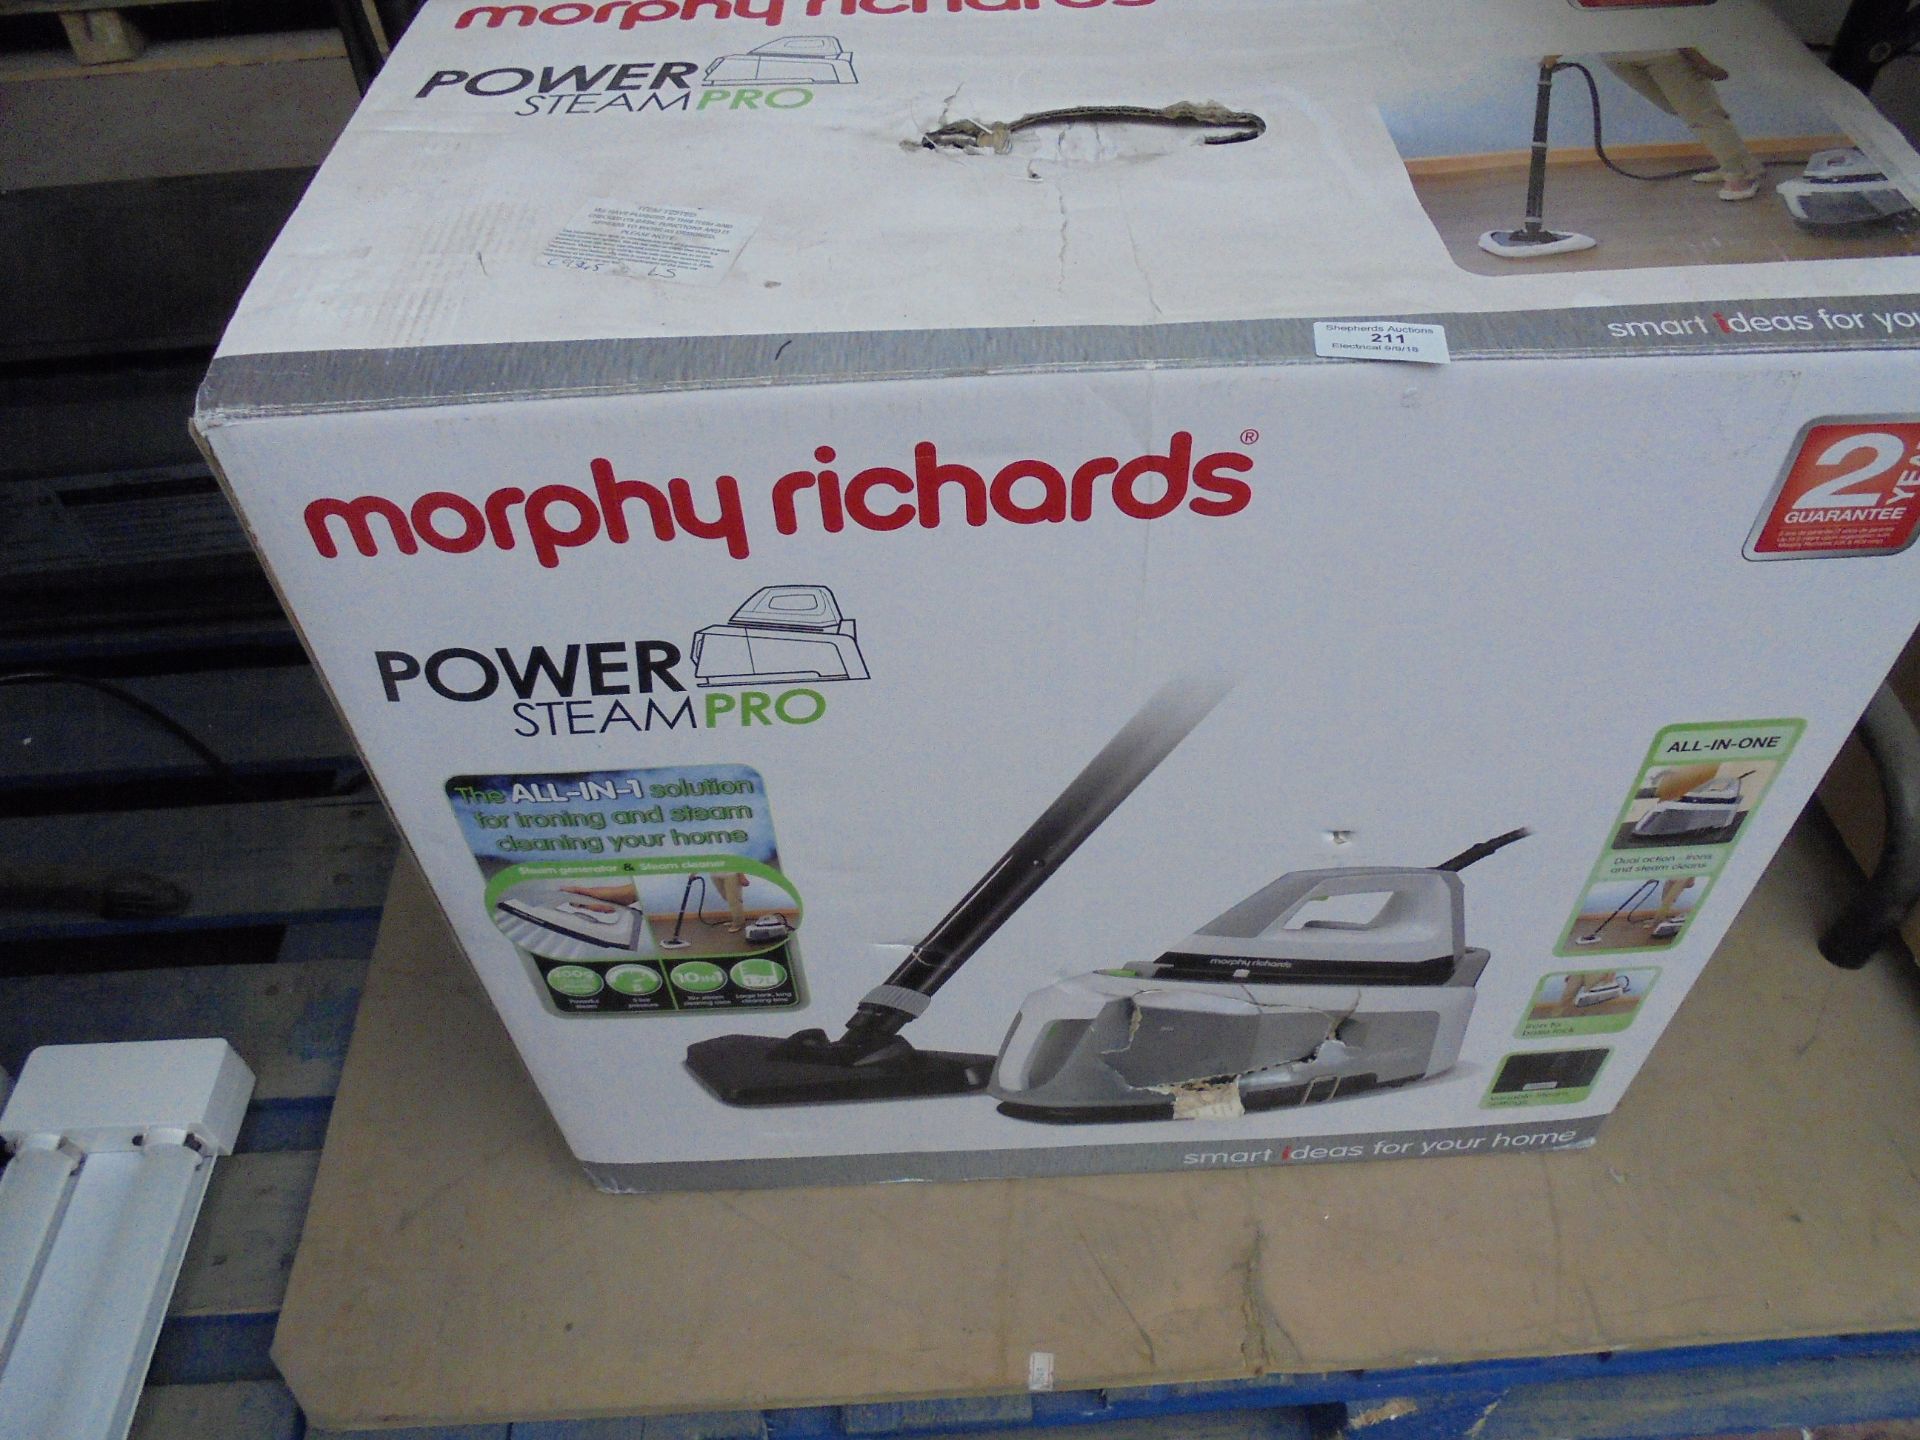 Morphy Richards power steam pro, tested working and boxed.